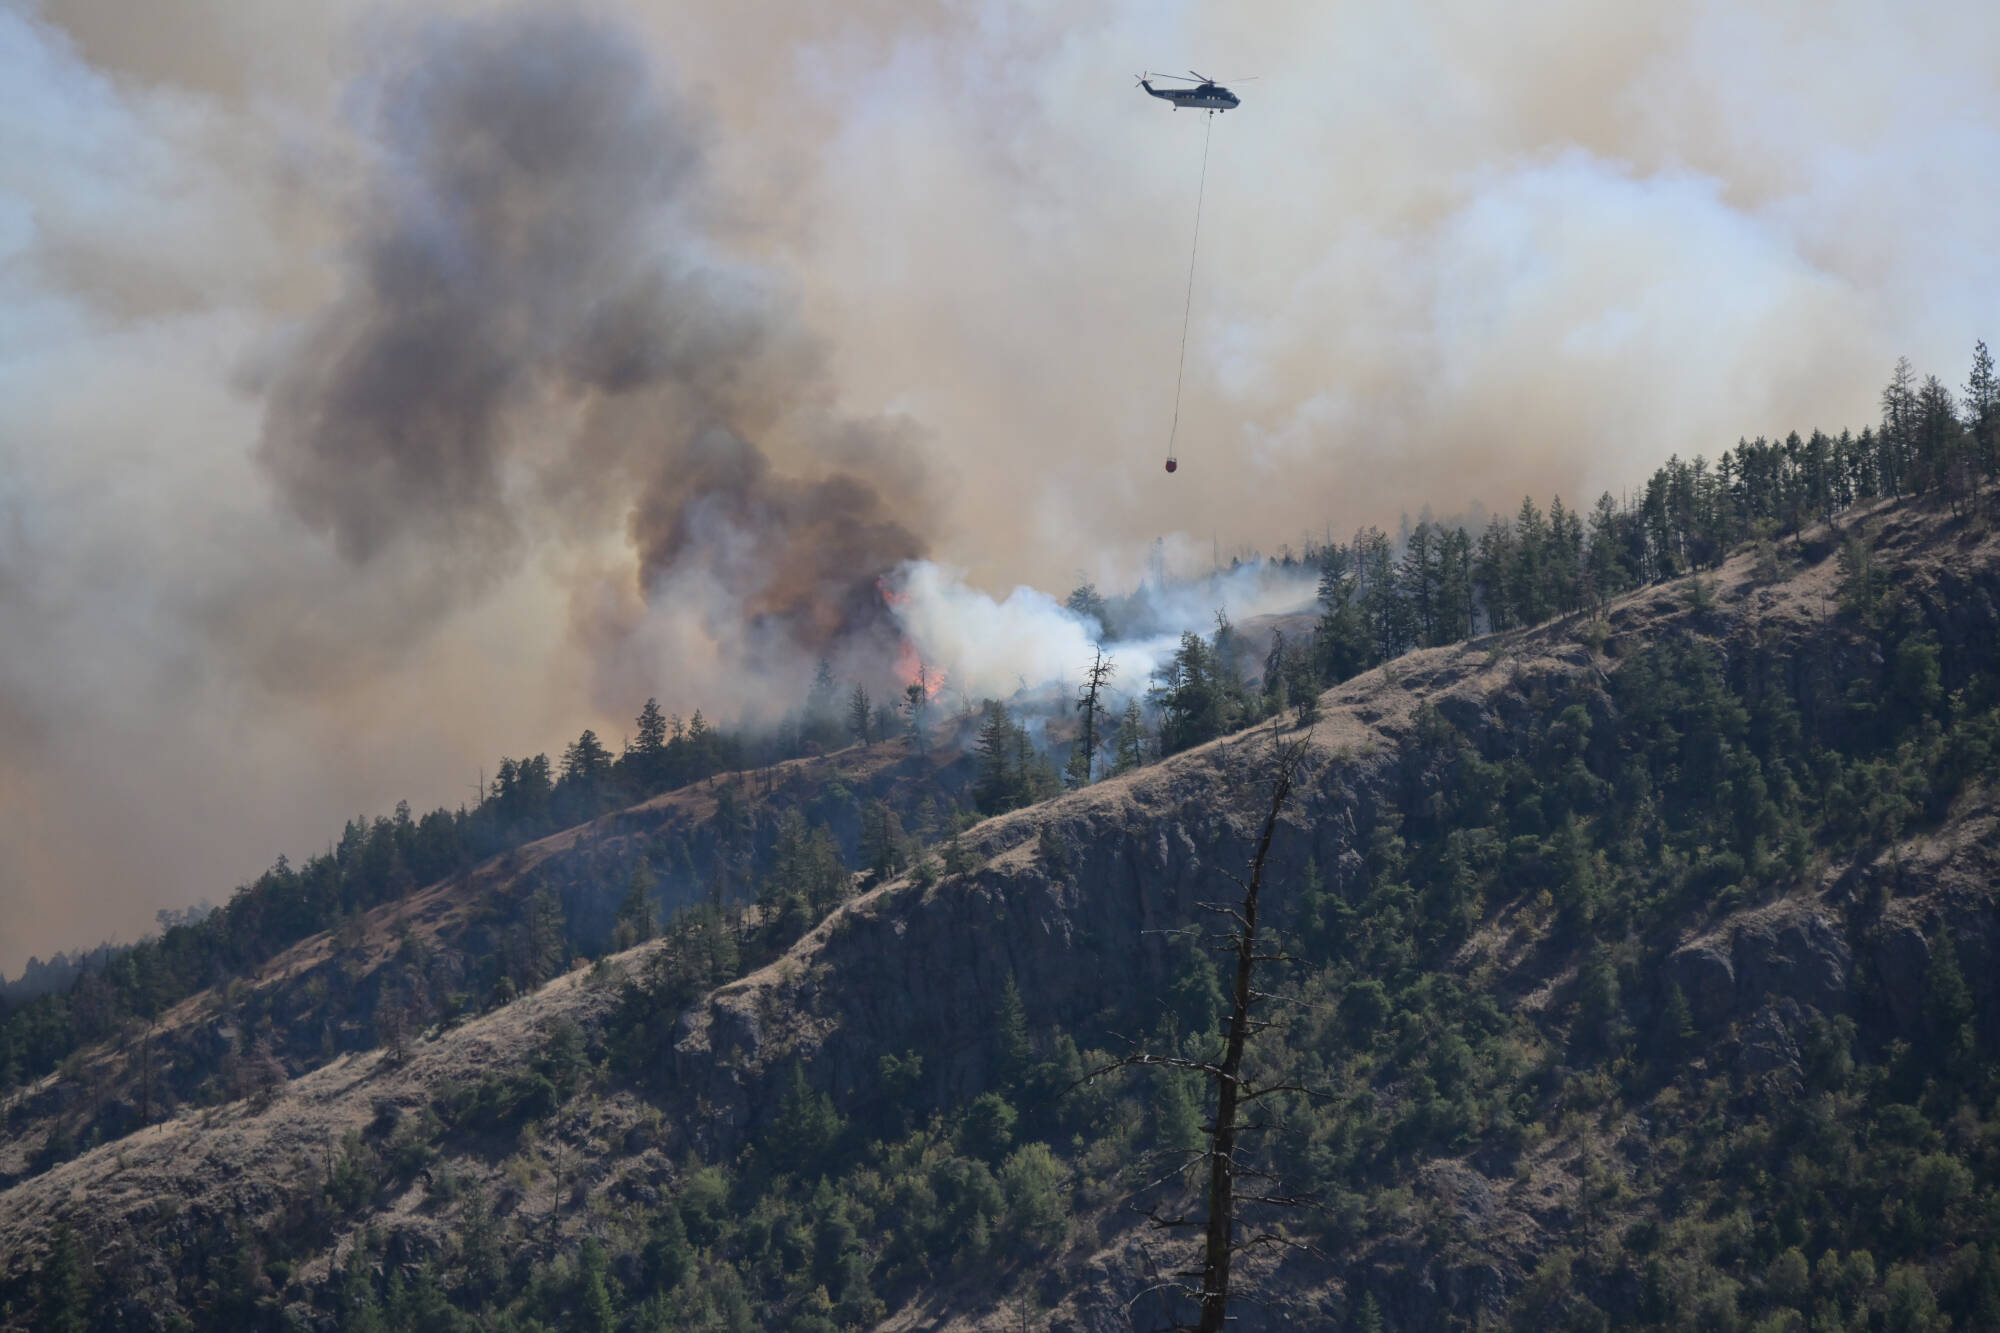 Helicopters attack the Upper Park Rill Creek wildfire on Friday, Aug. 18, hours after it erupted. (Brennan Phillips/Western News)